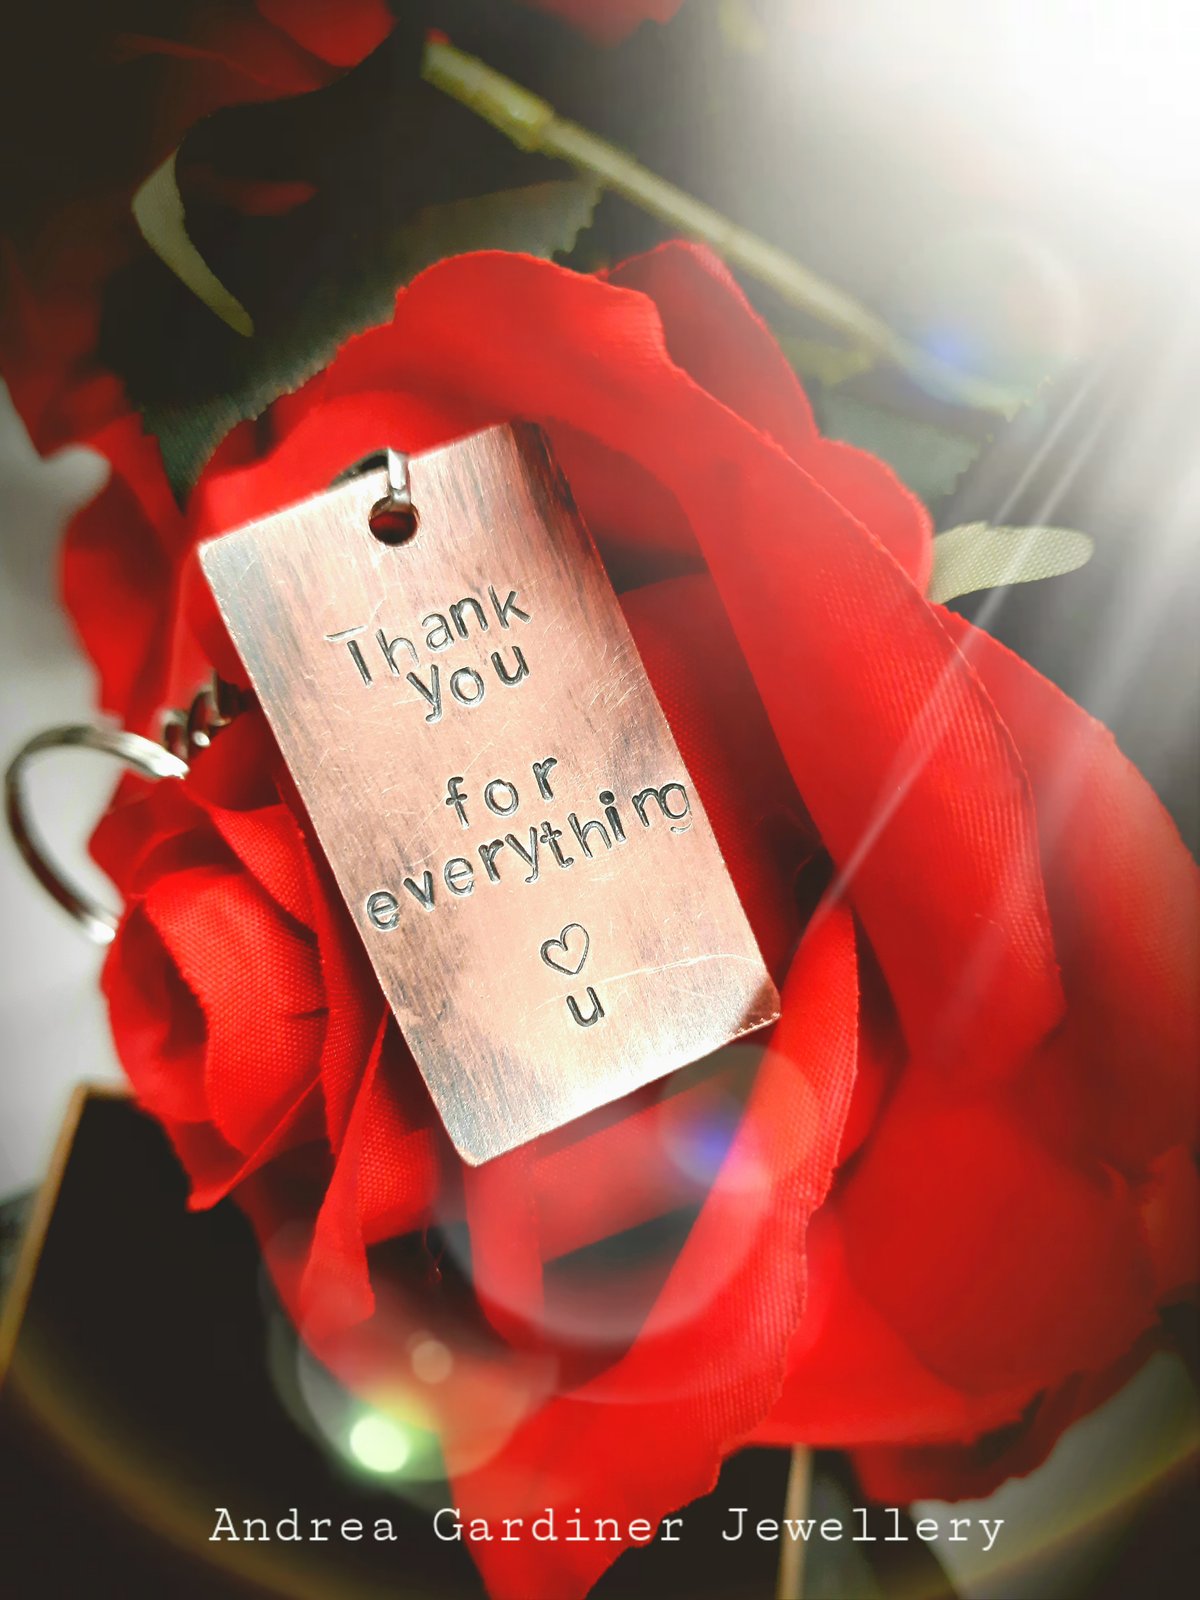 Image of "Thank you for everything, ❤ u" copper keyring 